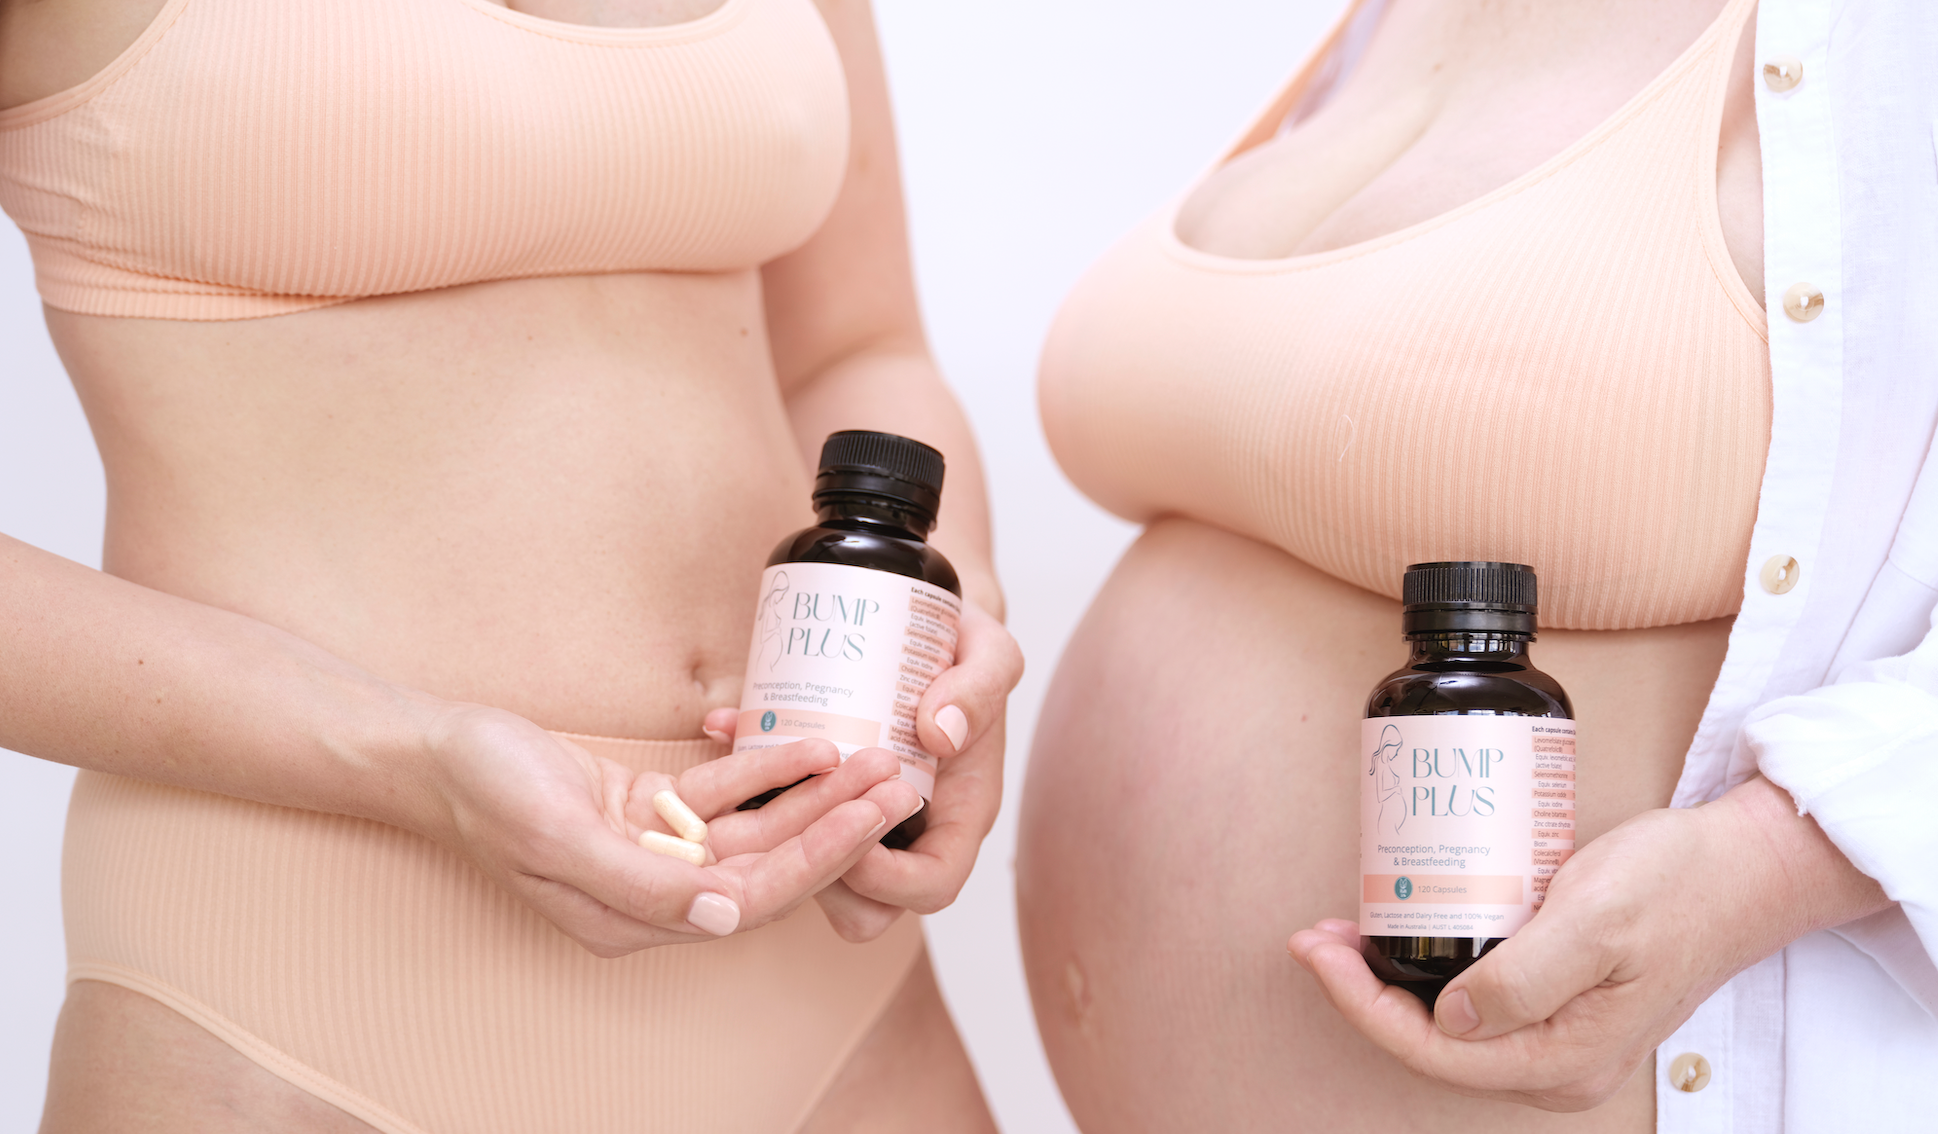 Less is more when it comes to your pregnancy vitamin